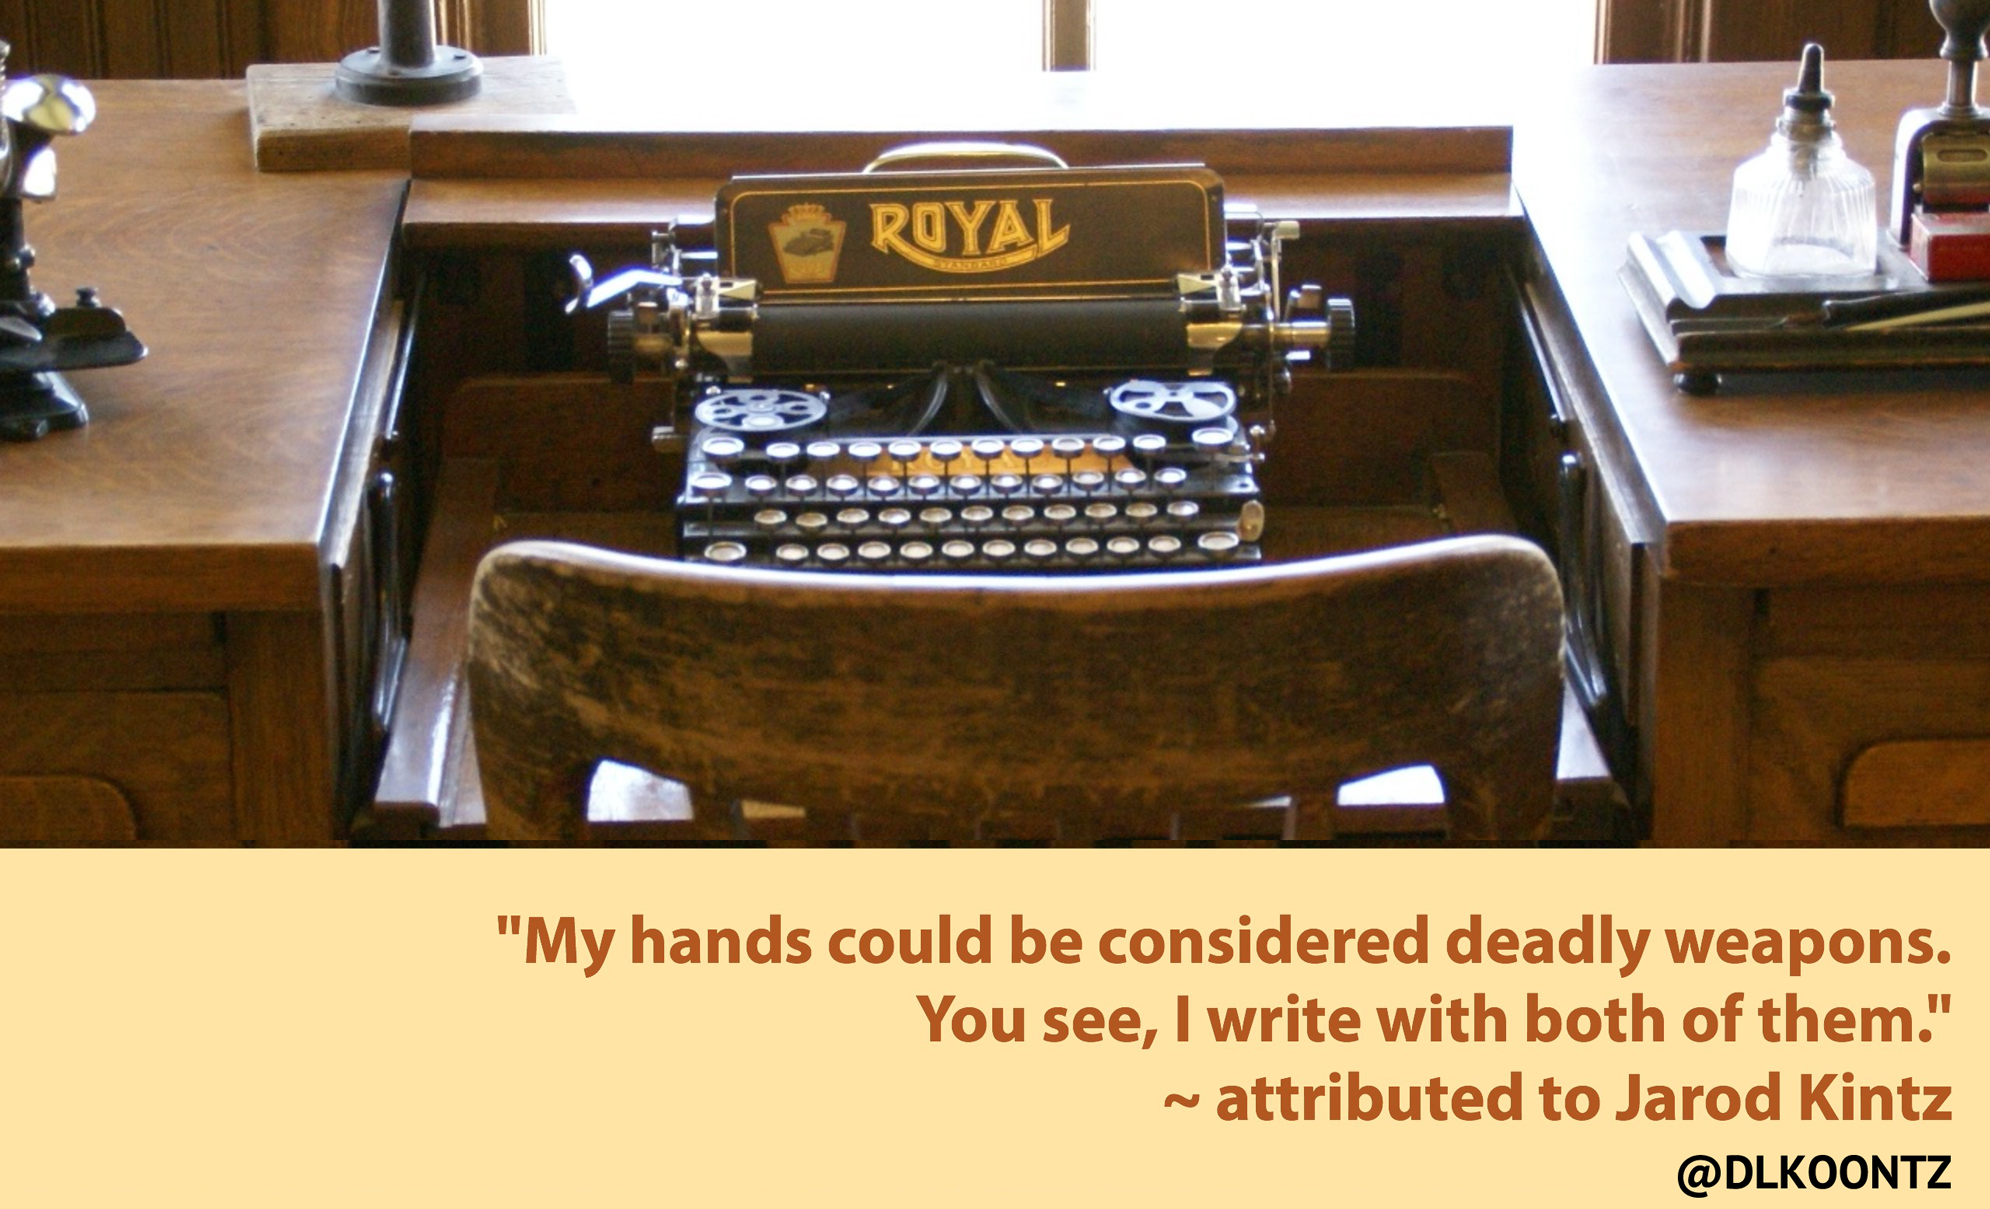 My hands could be considered deadly weapons. You see, I write with both of them. -attributed to Jarod Kintz